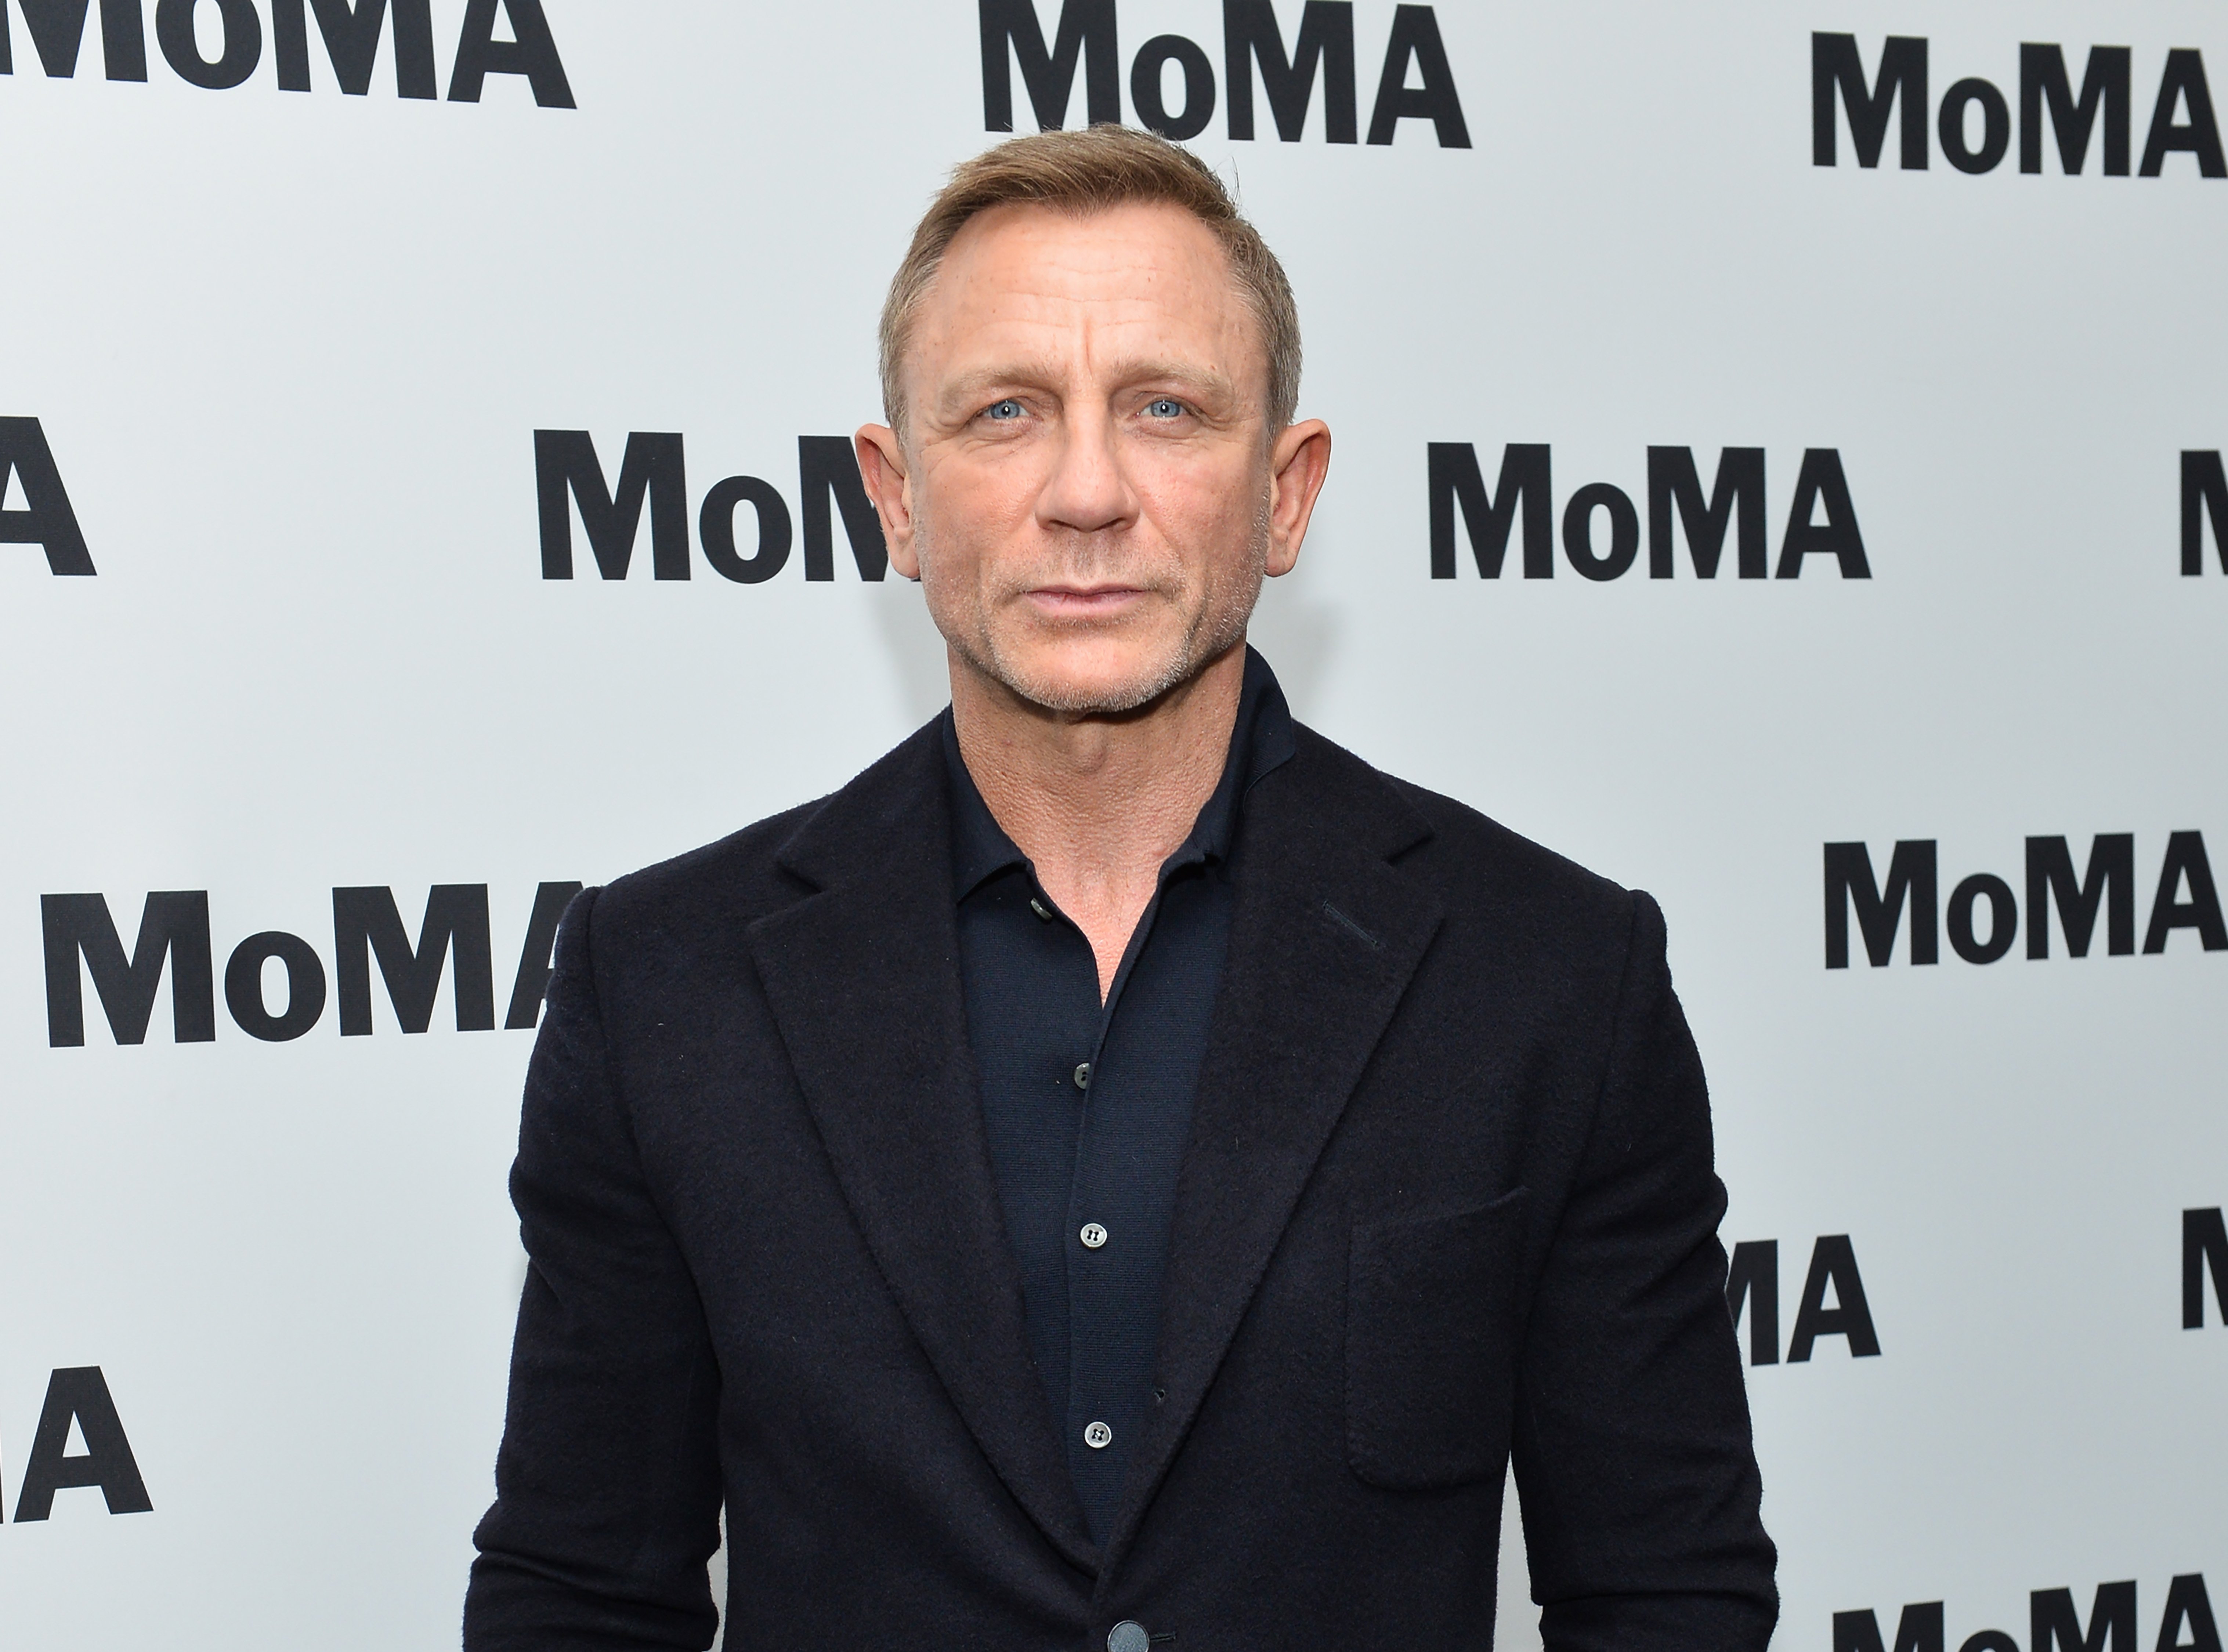 Daniel Craig attends "In Character: Daniel Craig" in New York City on March 3, 2020 | Photo: Getty Images